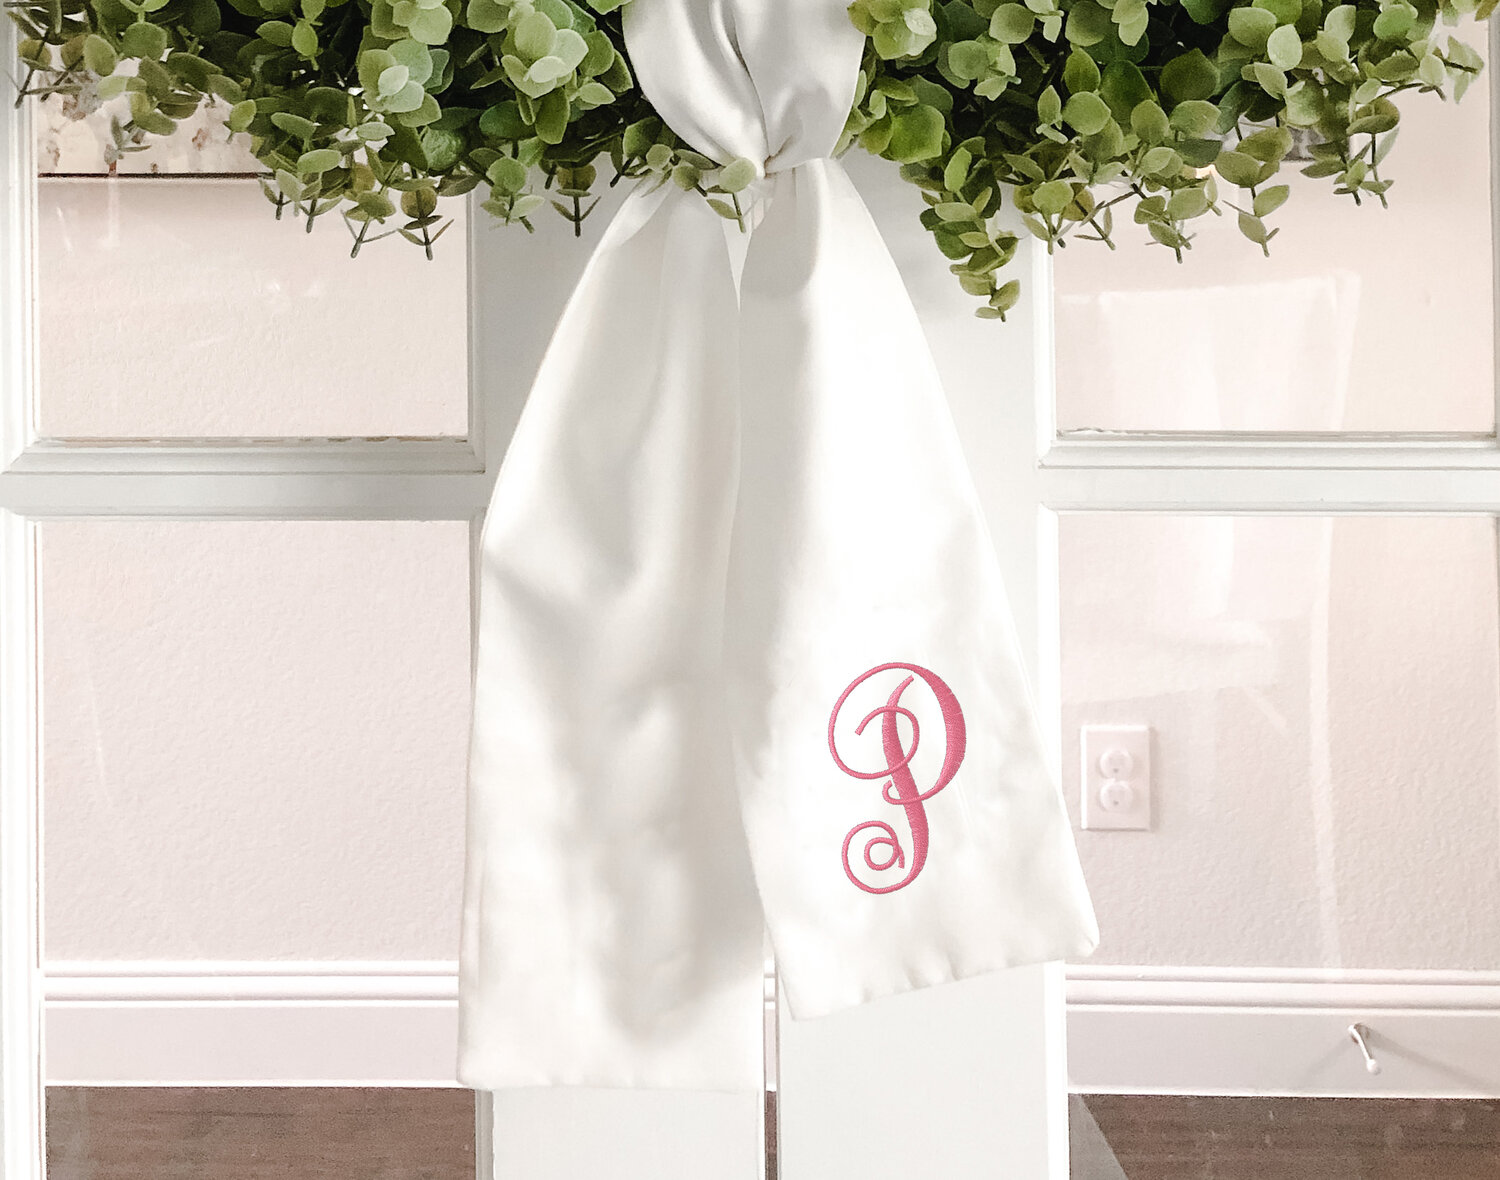 Wreath Sash for Front Door Decor - Blank White Wreath Sash for Embroidery Monogram - Wreath Accessories - Polyester - 4.5 W x 56 L